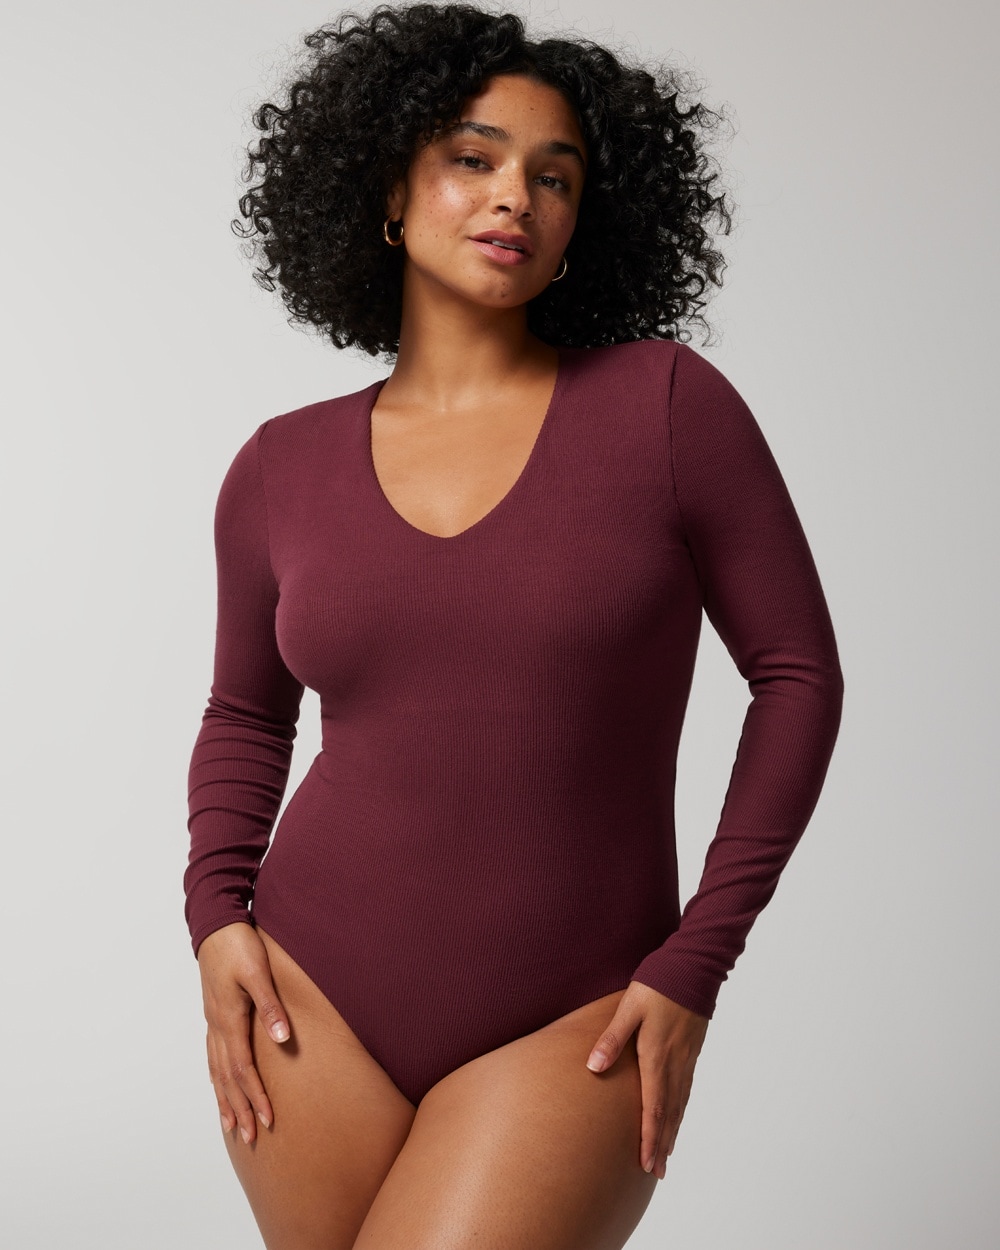 Busti Bras - Bra Boutique - It's bodysuit season, and we're excited to  announce that we've restocked one of our most popular, sexy and comfortable  bodysuits in the business, get yours before